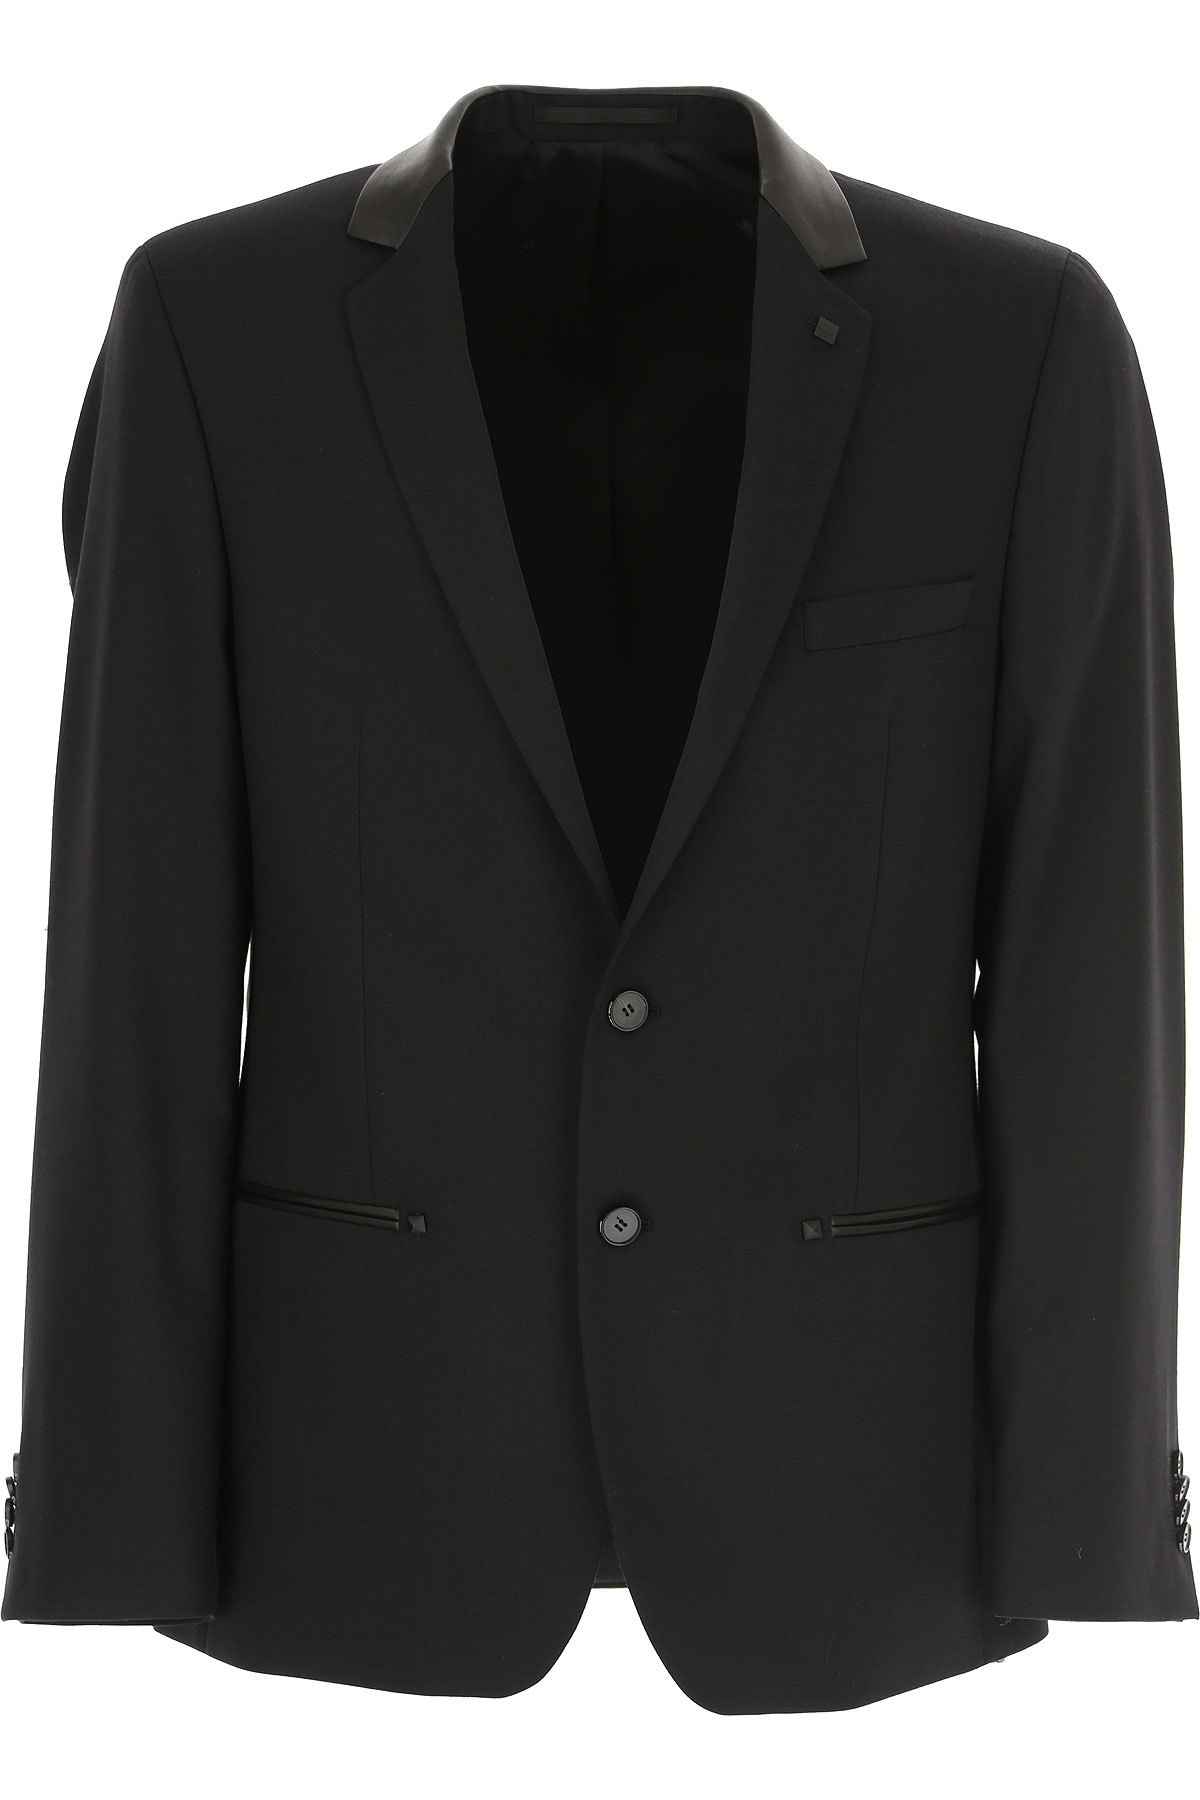 Mens Clothing Karl Lagerfeld, Style code: 155229-592086-990